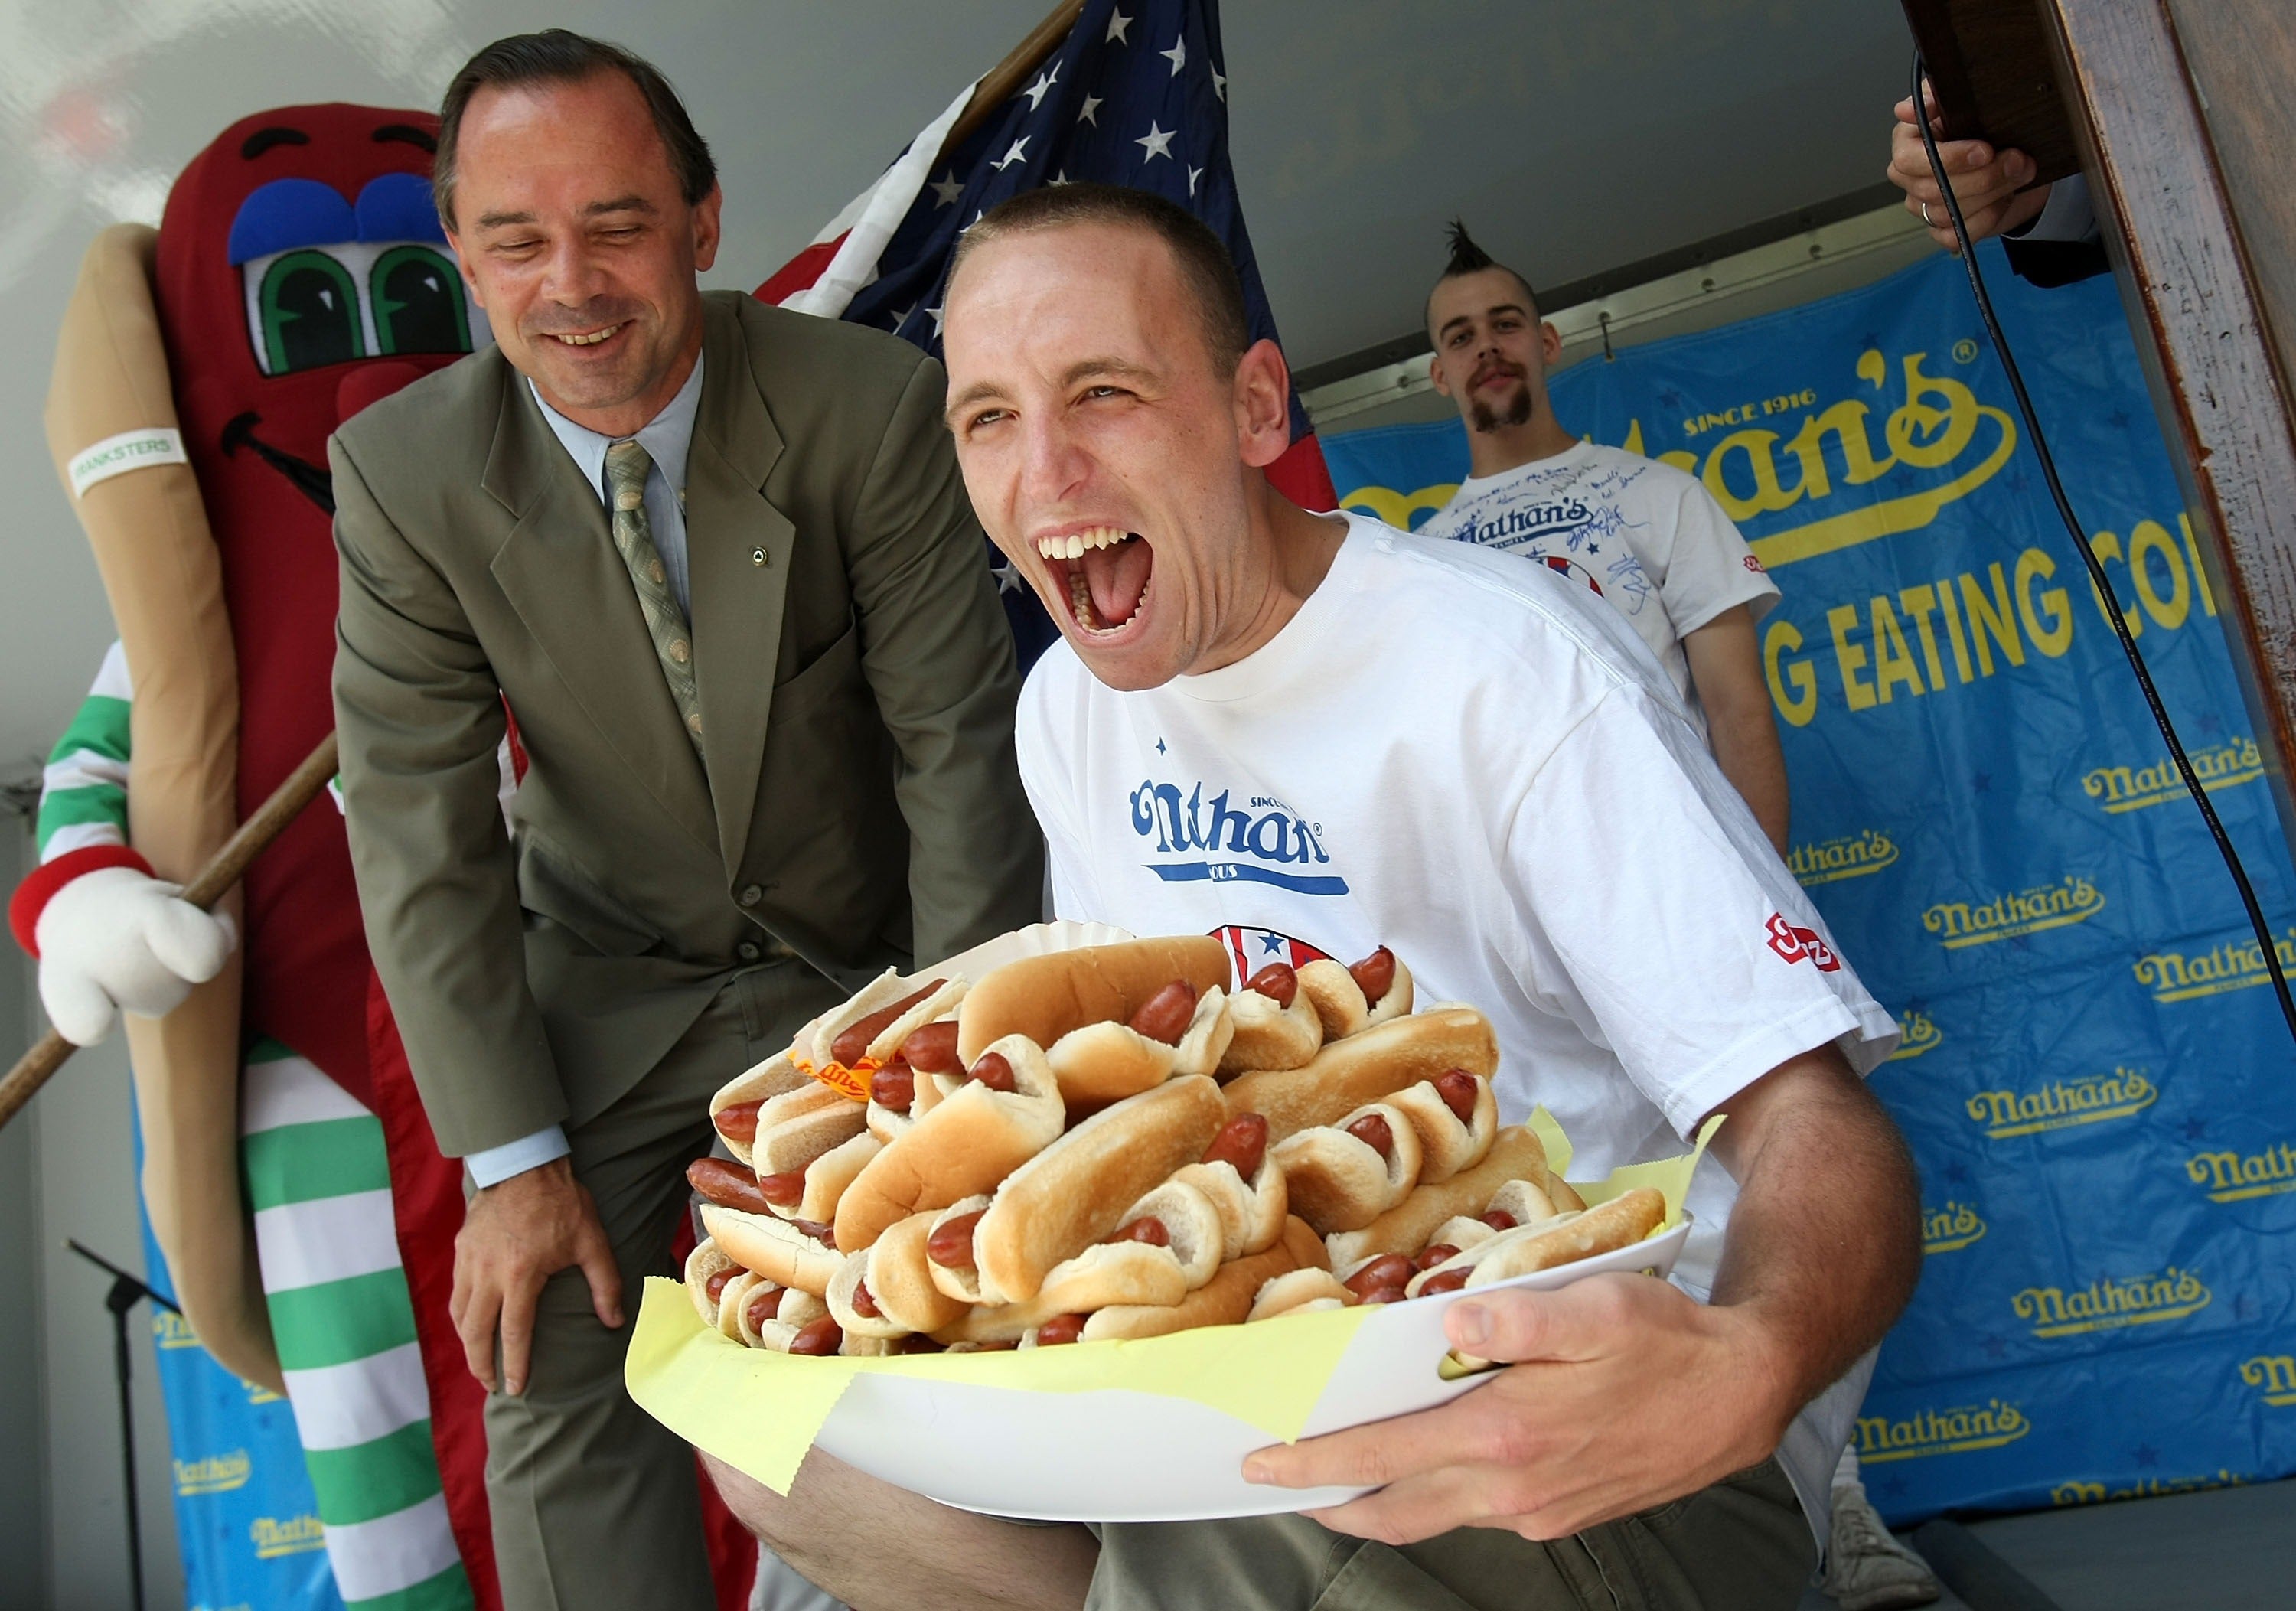 Study suggests eating one hot dog can cut 36 minutes off your life